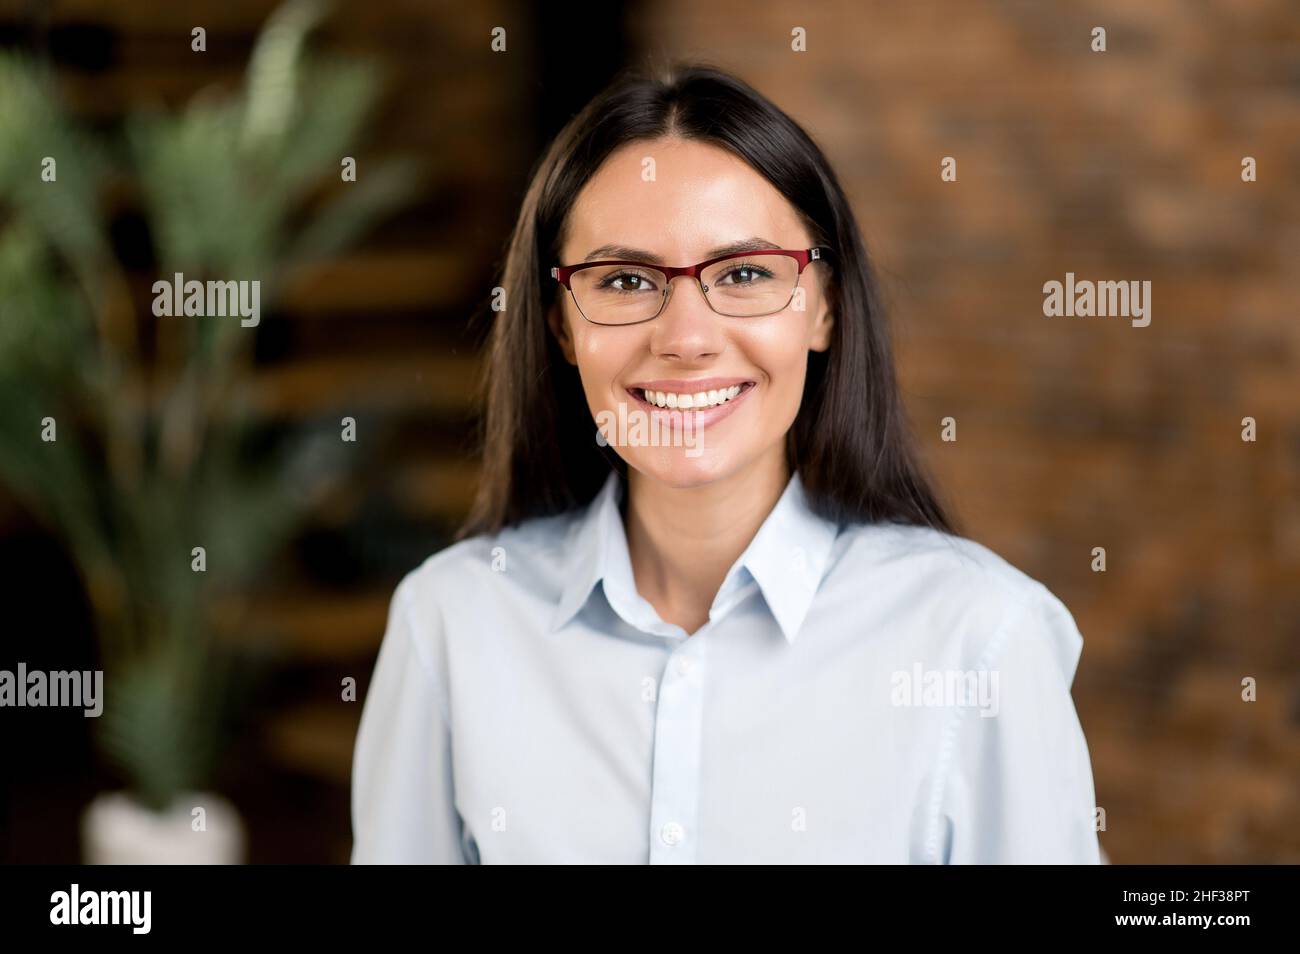 Close up portrait happy pleasant caucasian brunette business woman, company executive or manager wearing glasses, in formal clothes, looking at the camera, smiling friendly Stock Photo